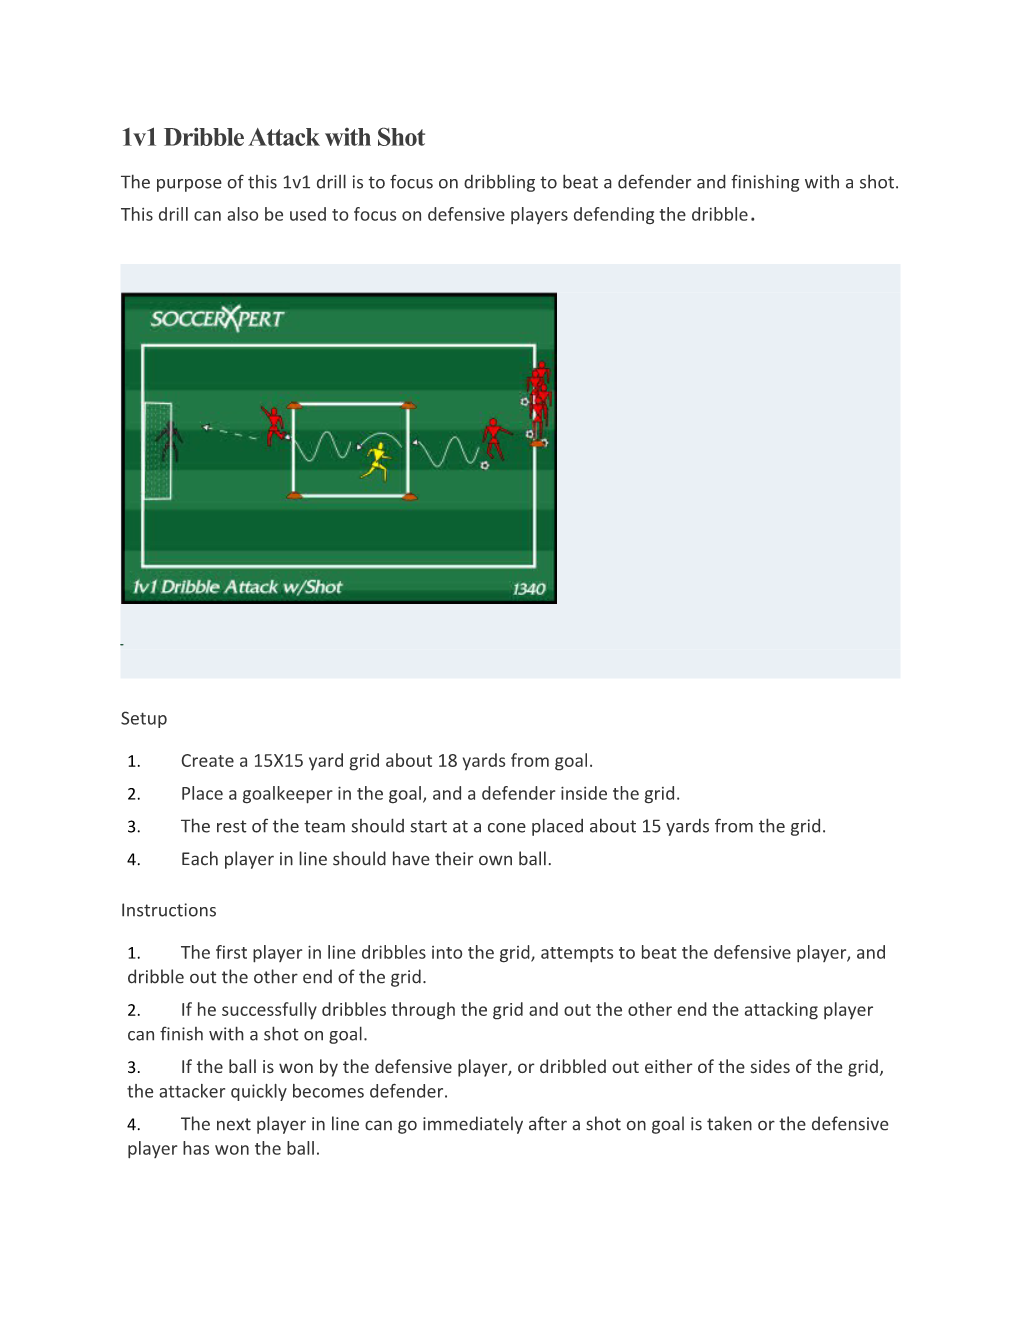 1V1 Dribble Attack with Shot